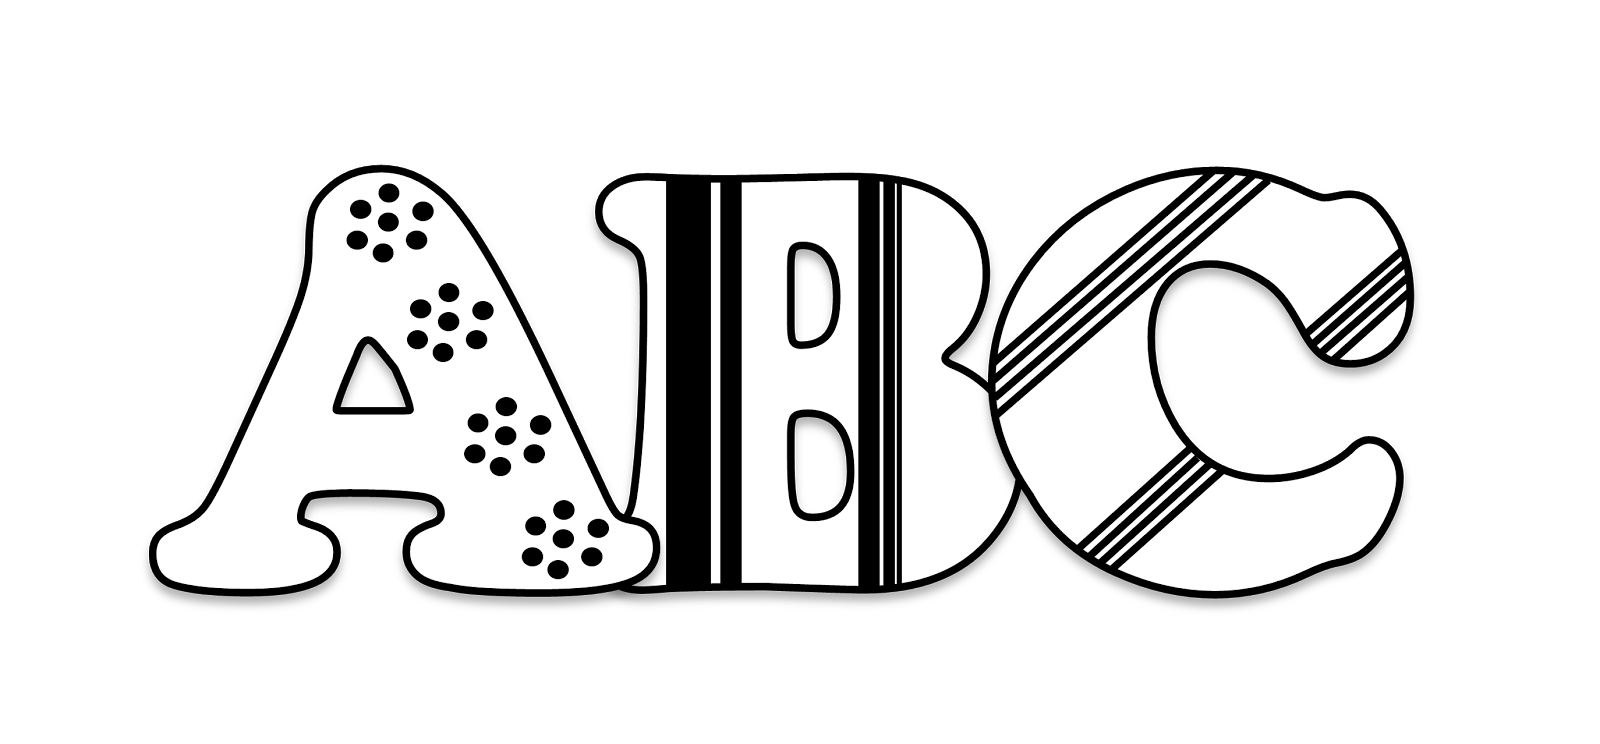 Free Abc Clip Art Black And White, Download Free Abc Clip Art Black And ...